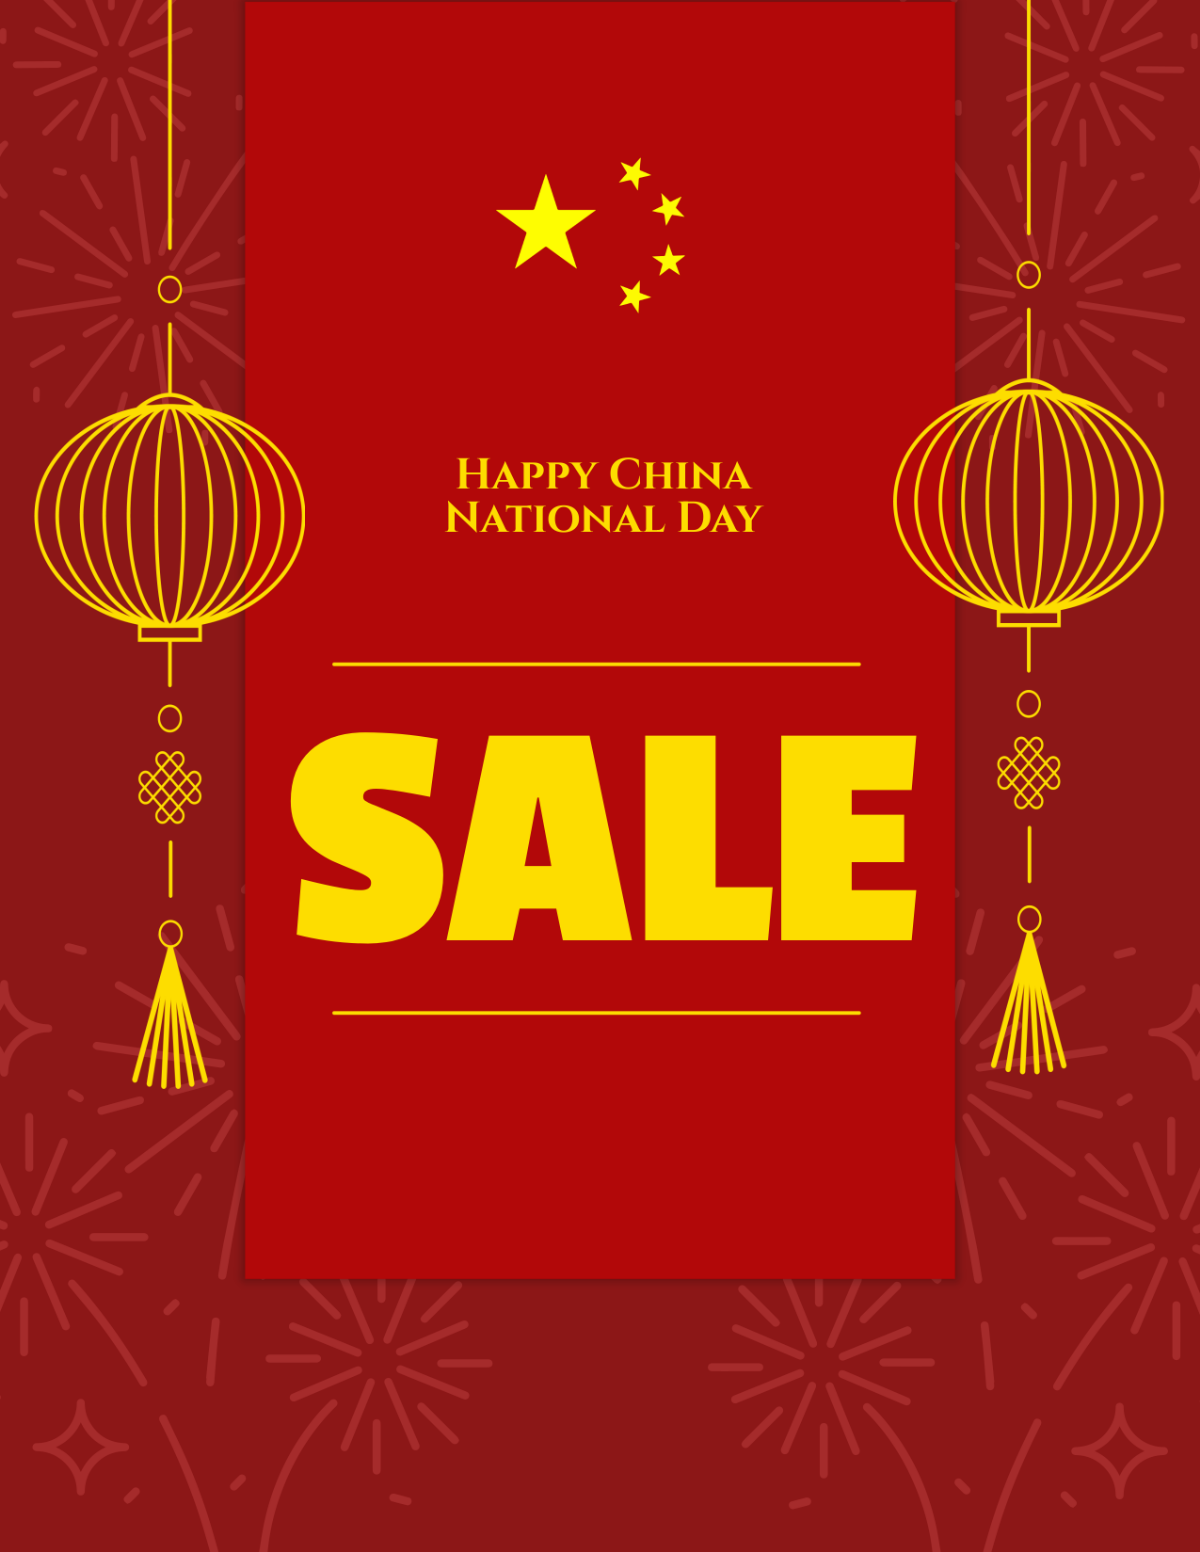 Free China National Day Sales Flyer Template